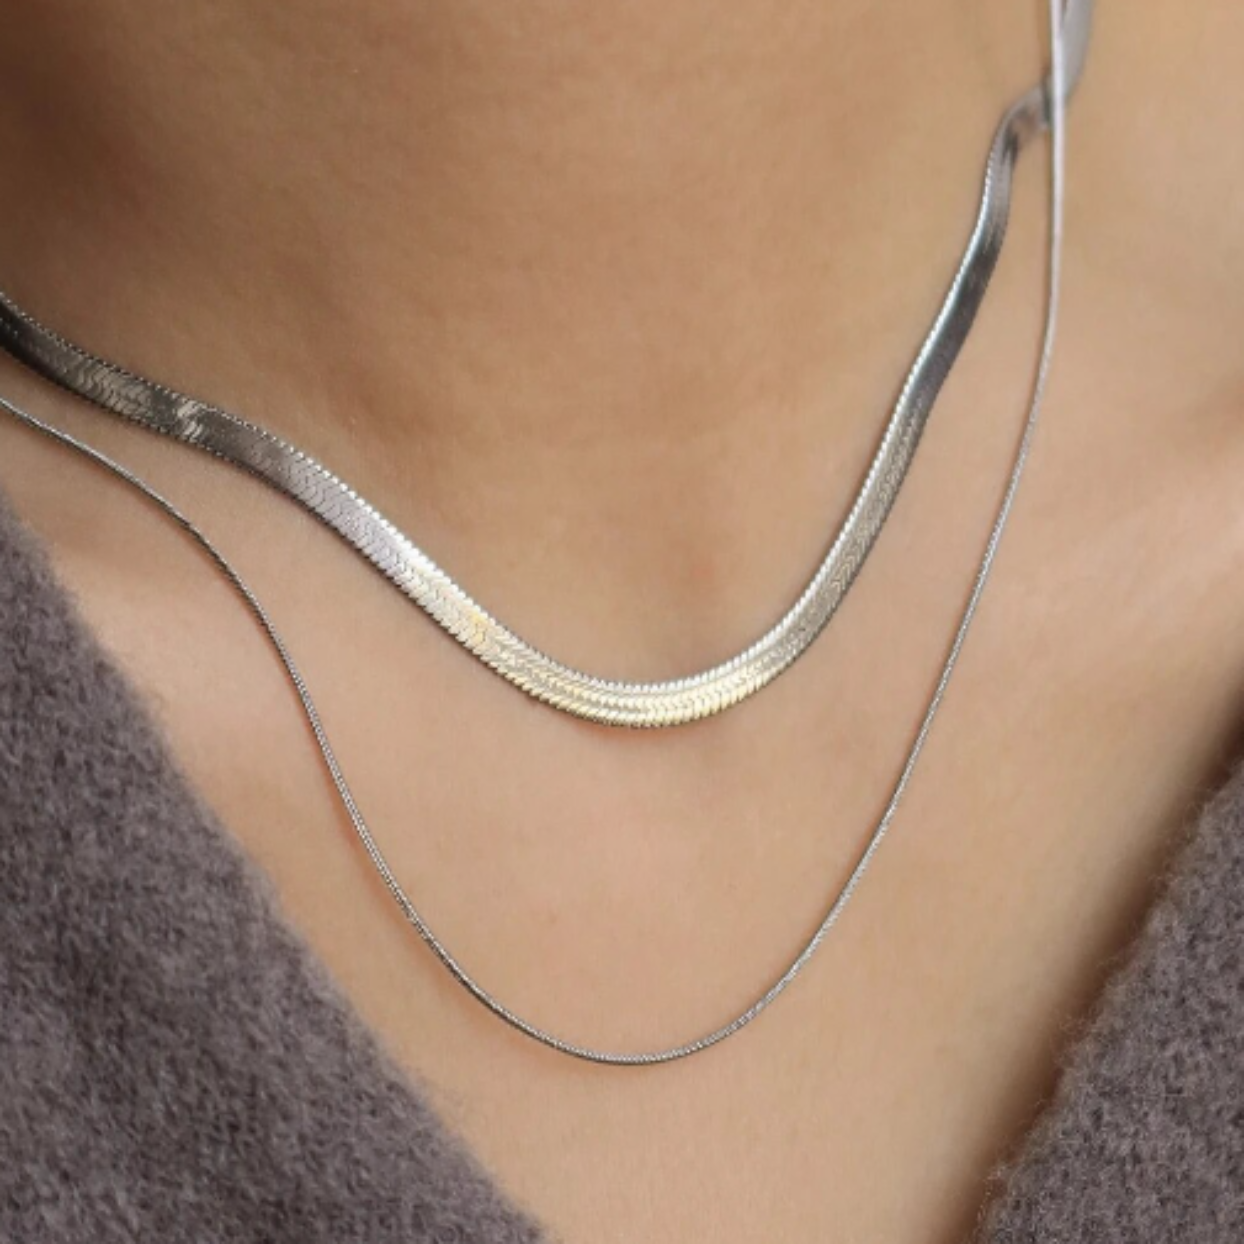 CLASSIC SILVER SNAKE - WATER PROOF NECKLACE - Premium necklaces from www.beachboho.com.au - Just $65! Shop now at www.beachboho.com.au